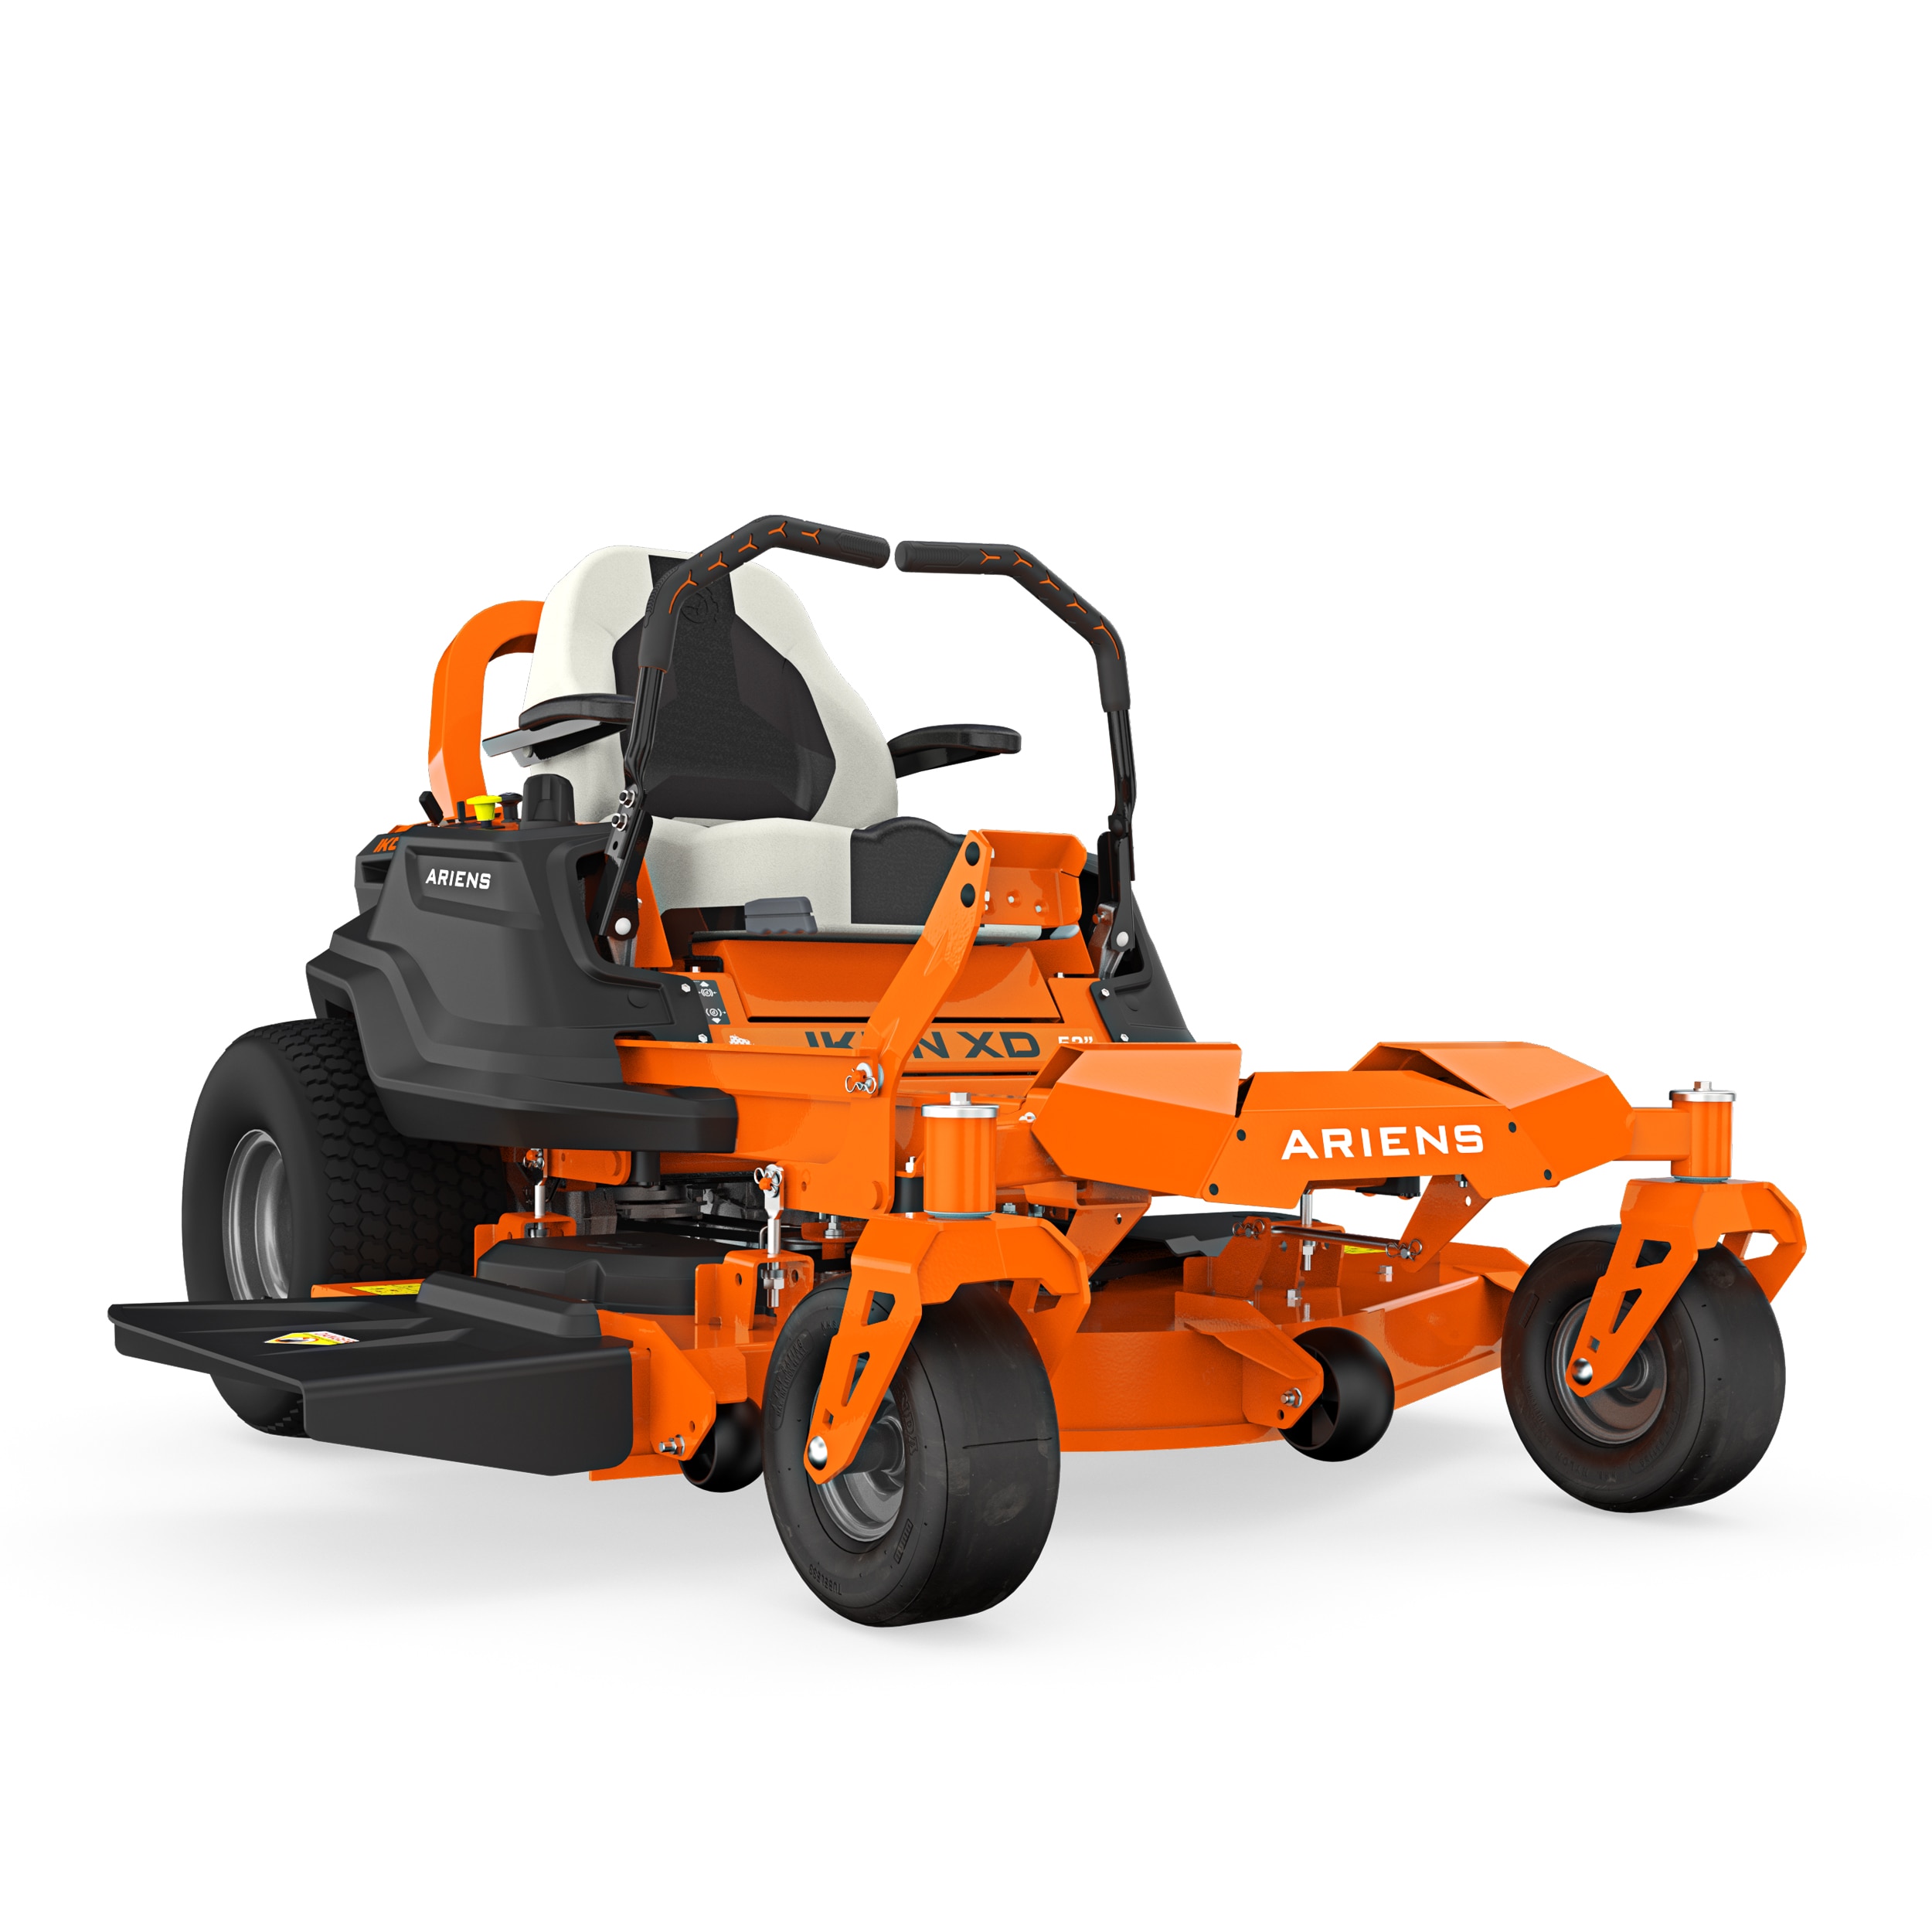 Ariens Ikon 24-HP V-twin Dual Hydrostatic 52-in Zero-turn Lawn Mower with Mulching Capability (Kit Sold Separately)